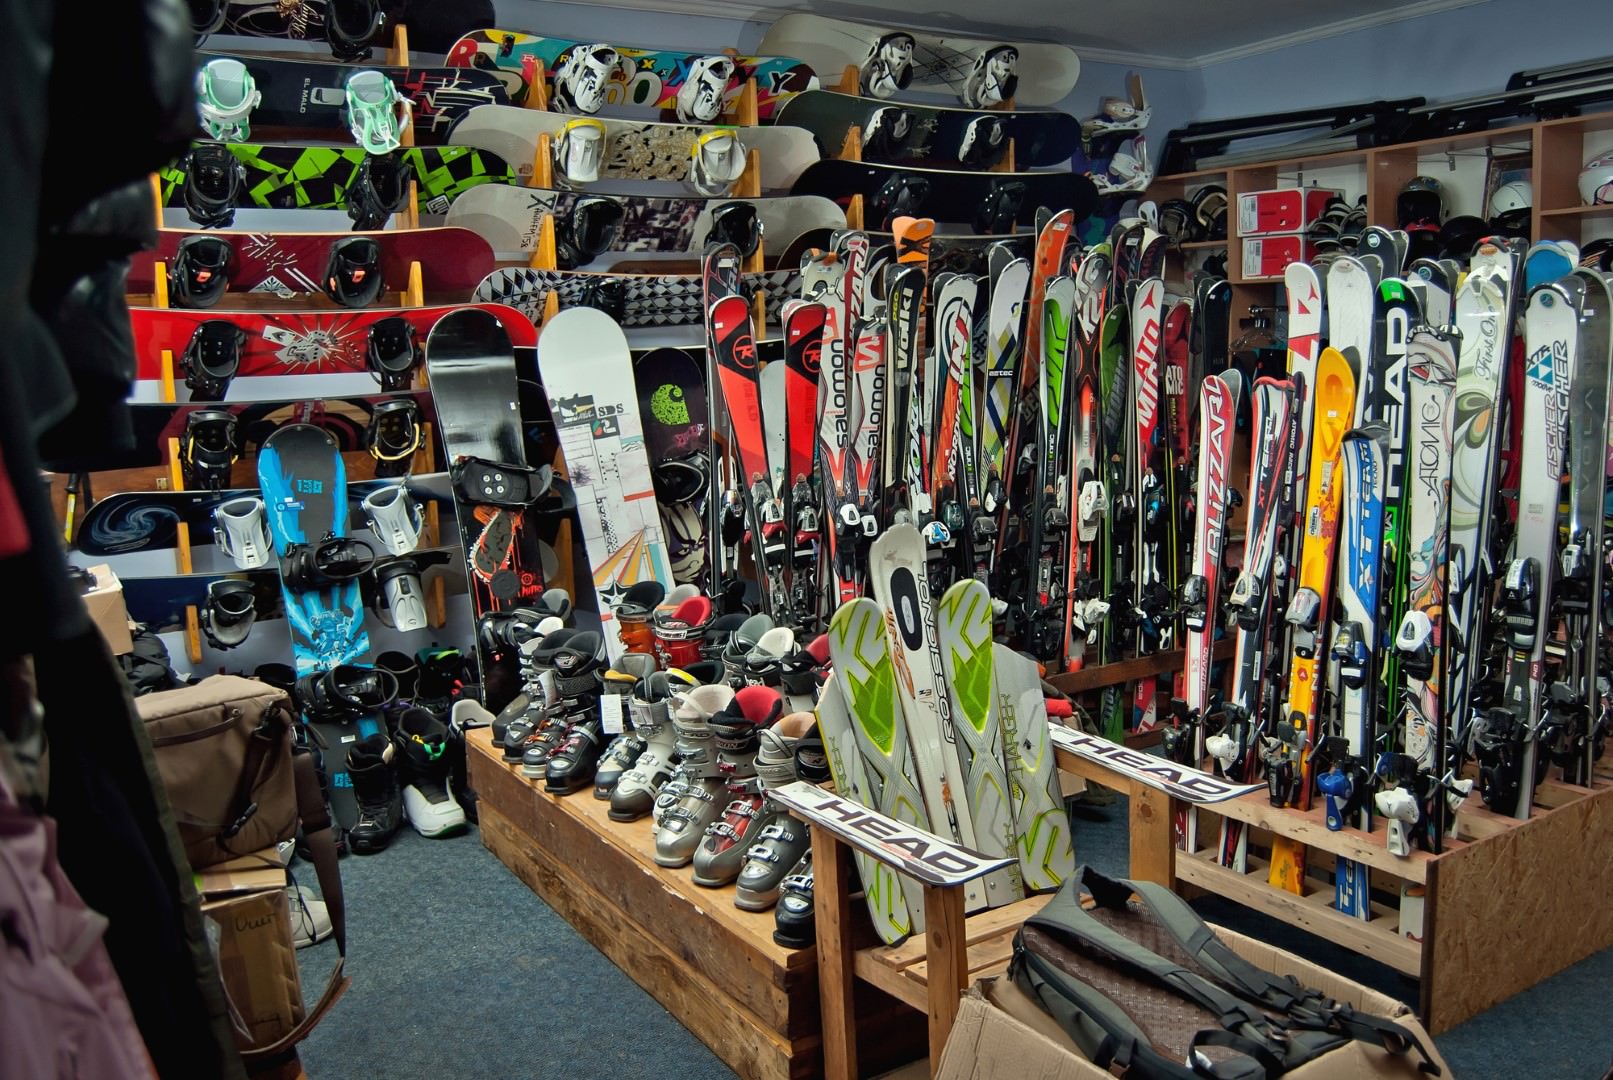 Where to Buy Used Snowboards and What to Look Out For